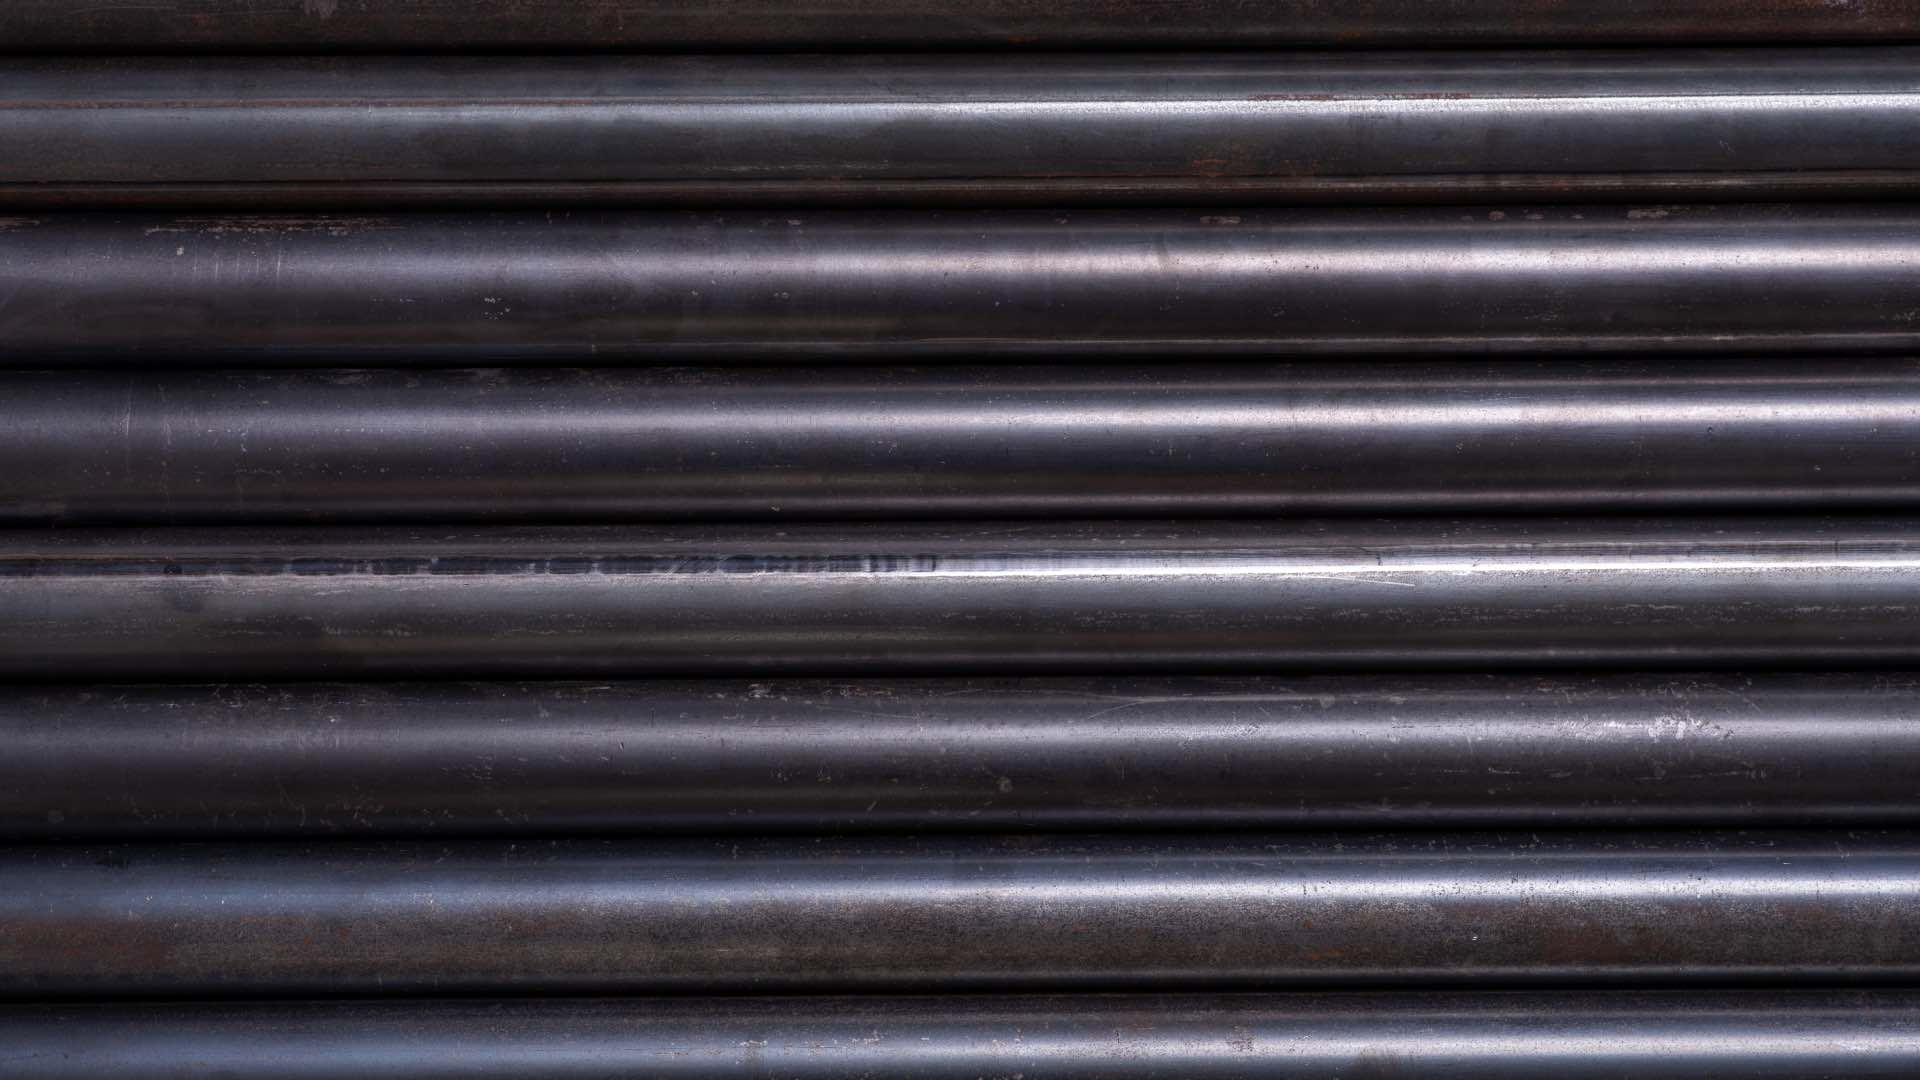 Raw black steel bars used for unique furniture